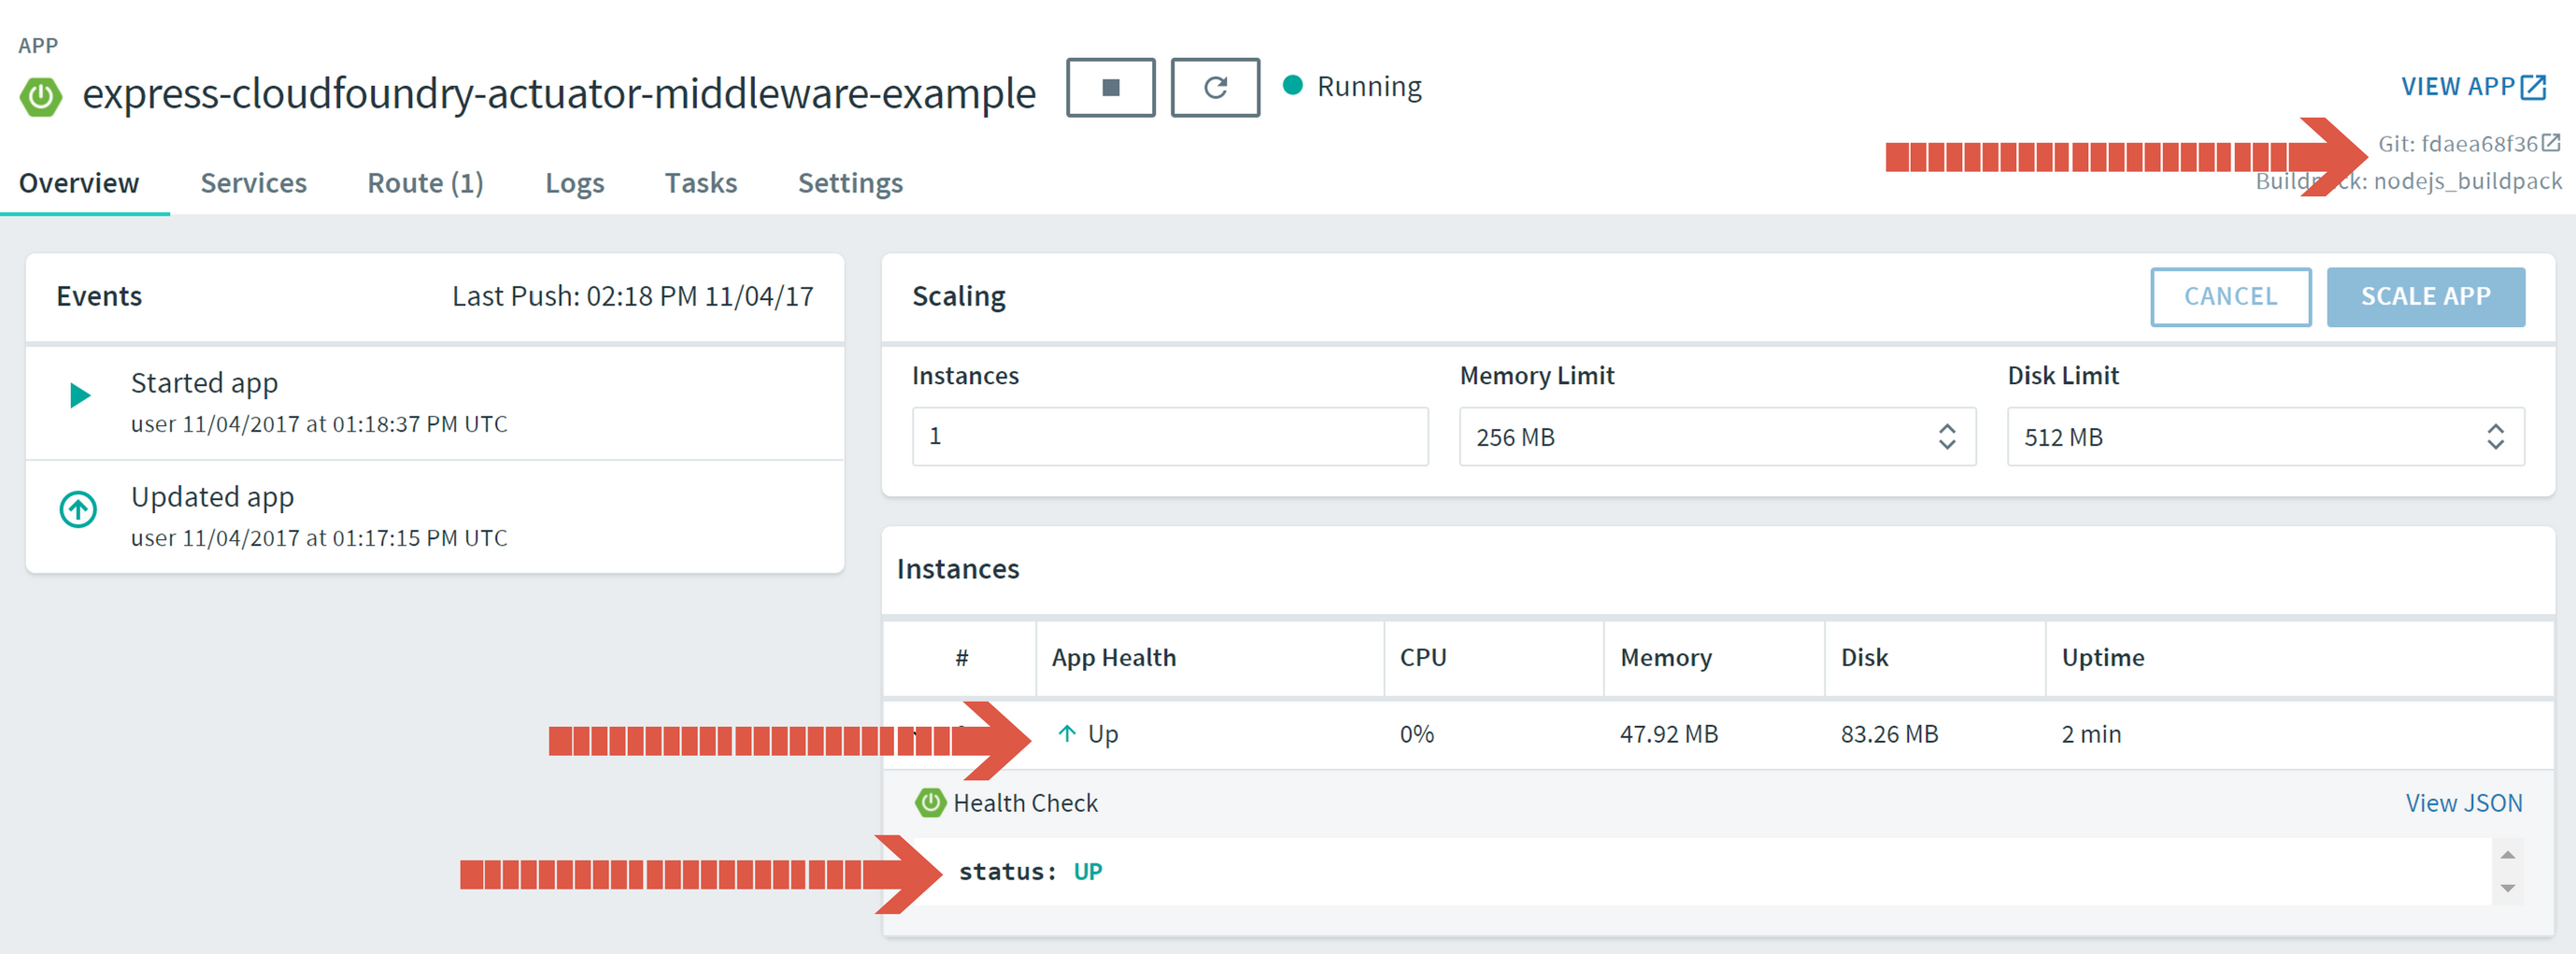 Cloud Foundry App overview with Health Check